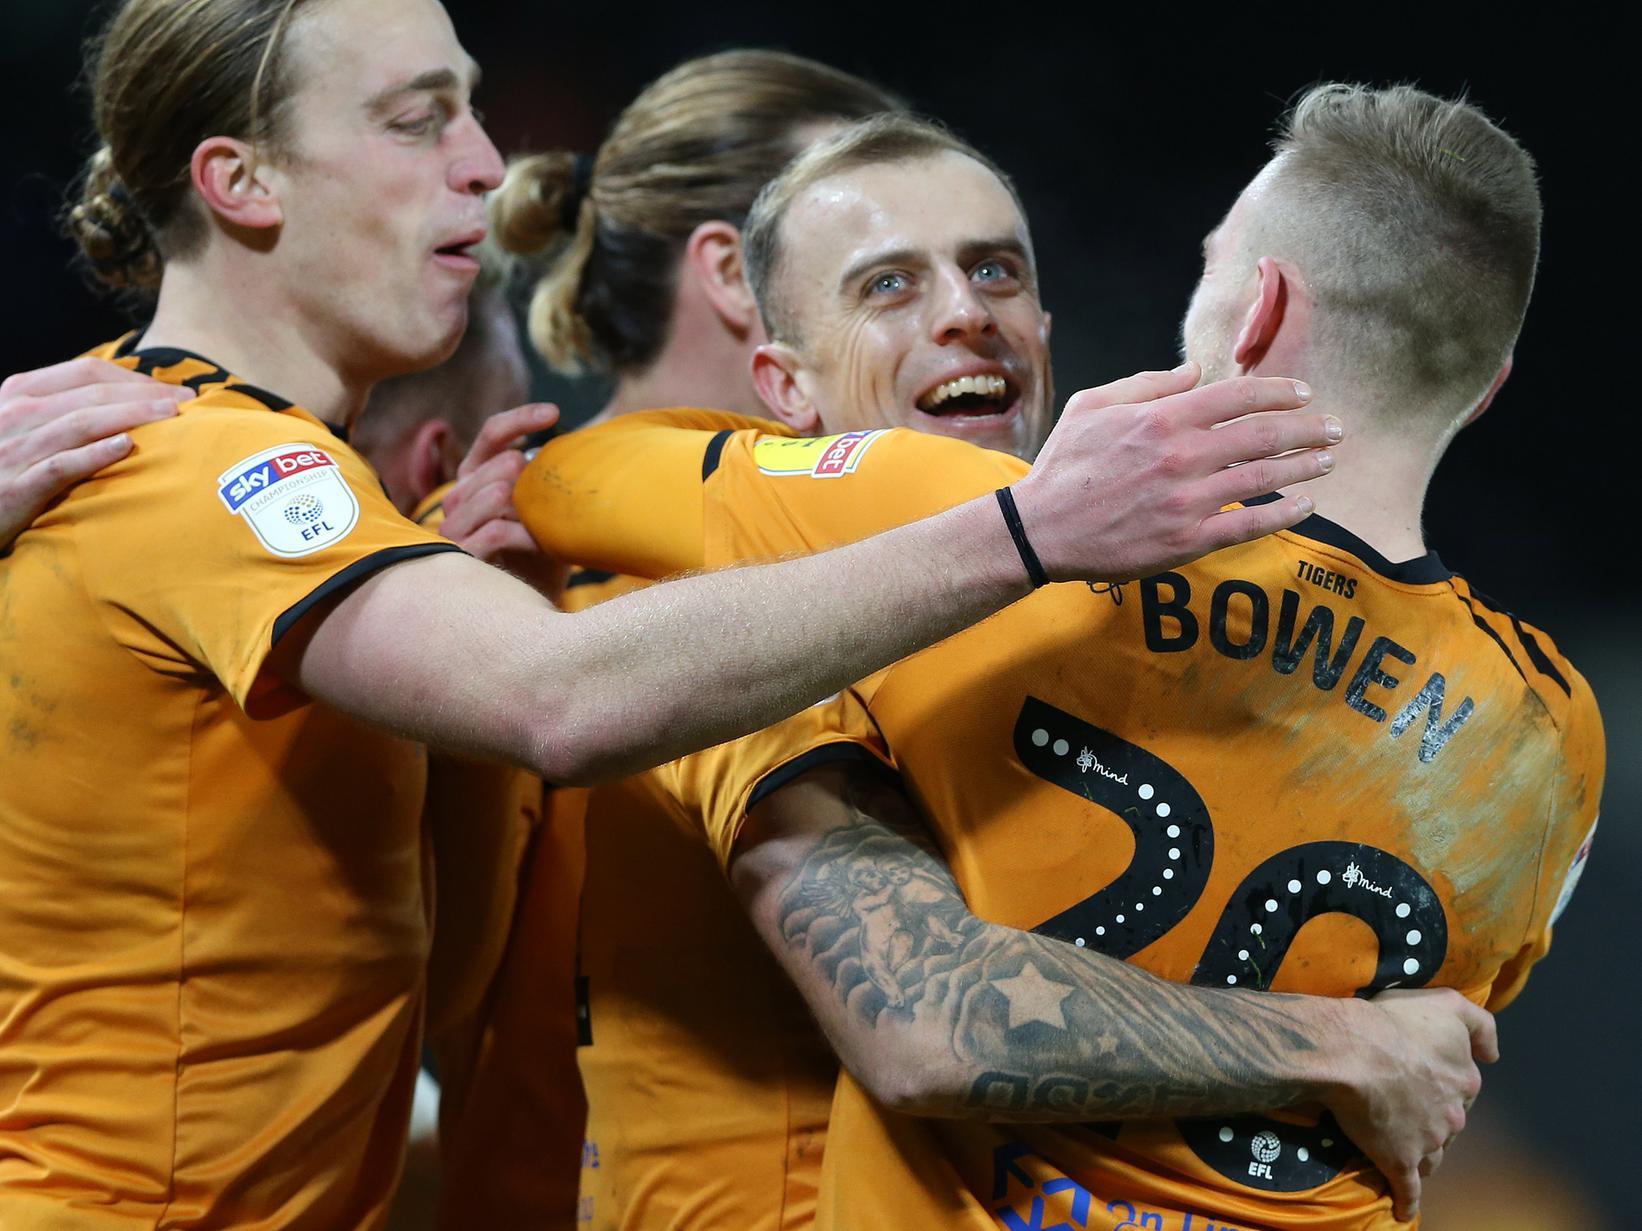 Hull City have a gem in Jarrod Bowen, but will need to improve to affect the play-off picture.